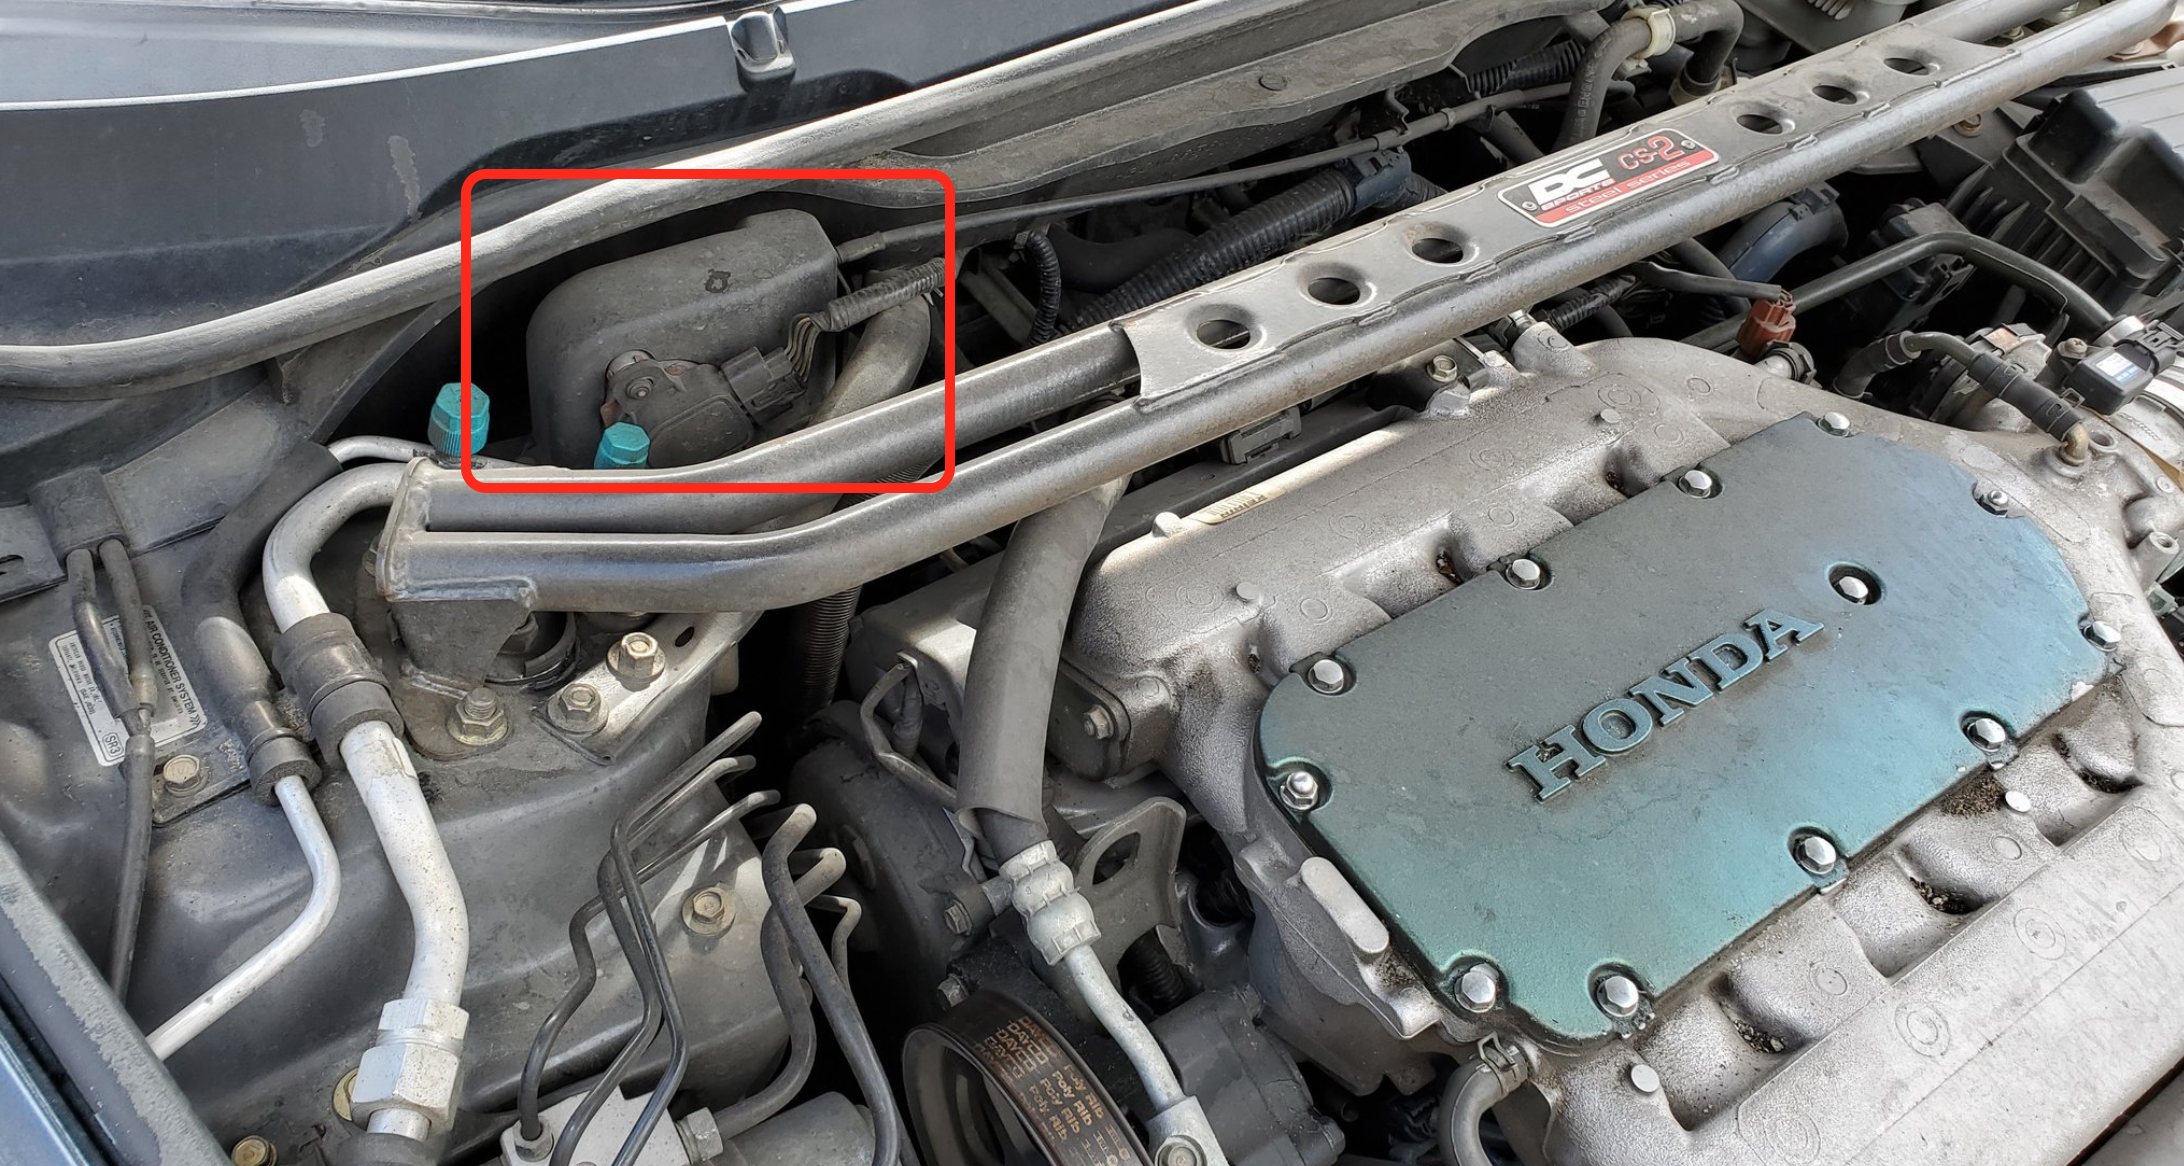 View of engine bay with sensor cover circled in red